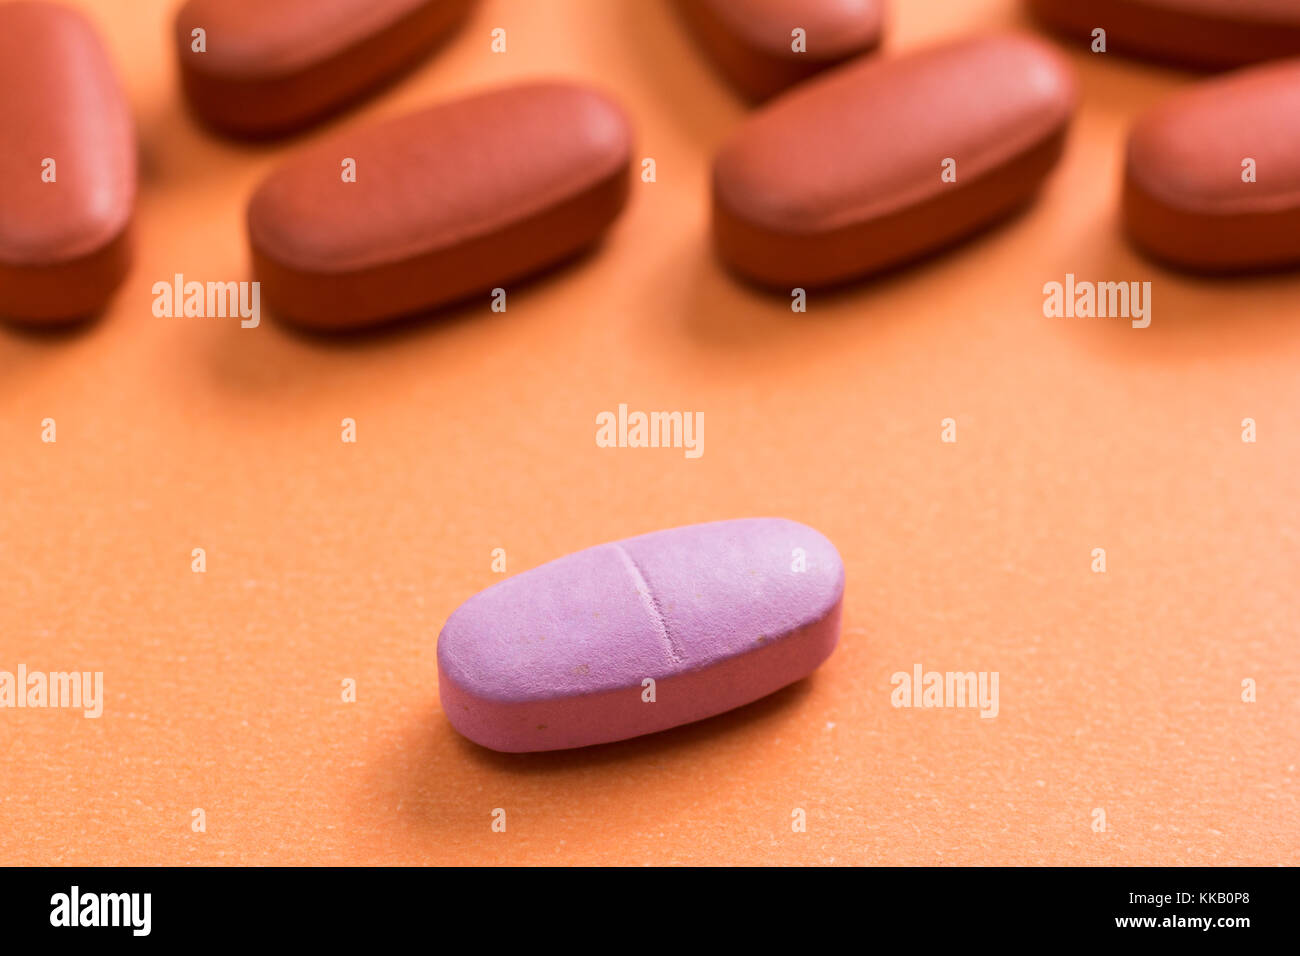 Heap of brown capsules on orange table. One pink pill is apart, isolated. Difference. Stock Photo